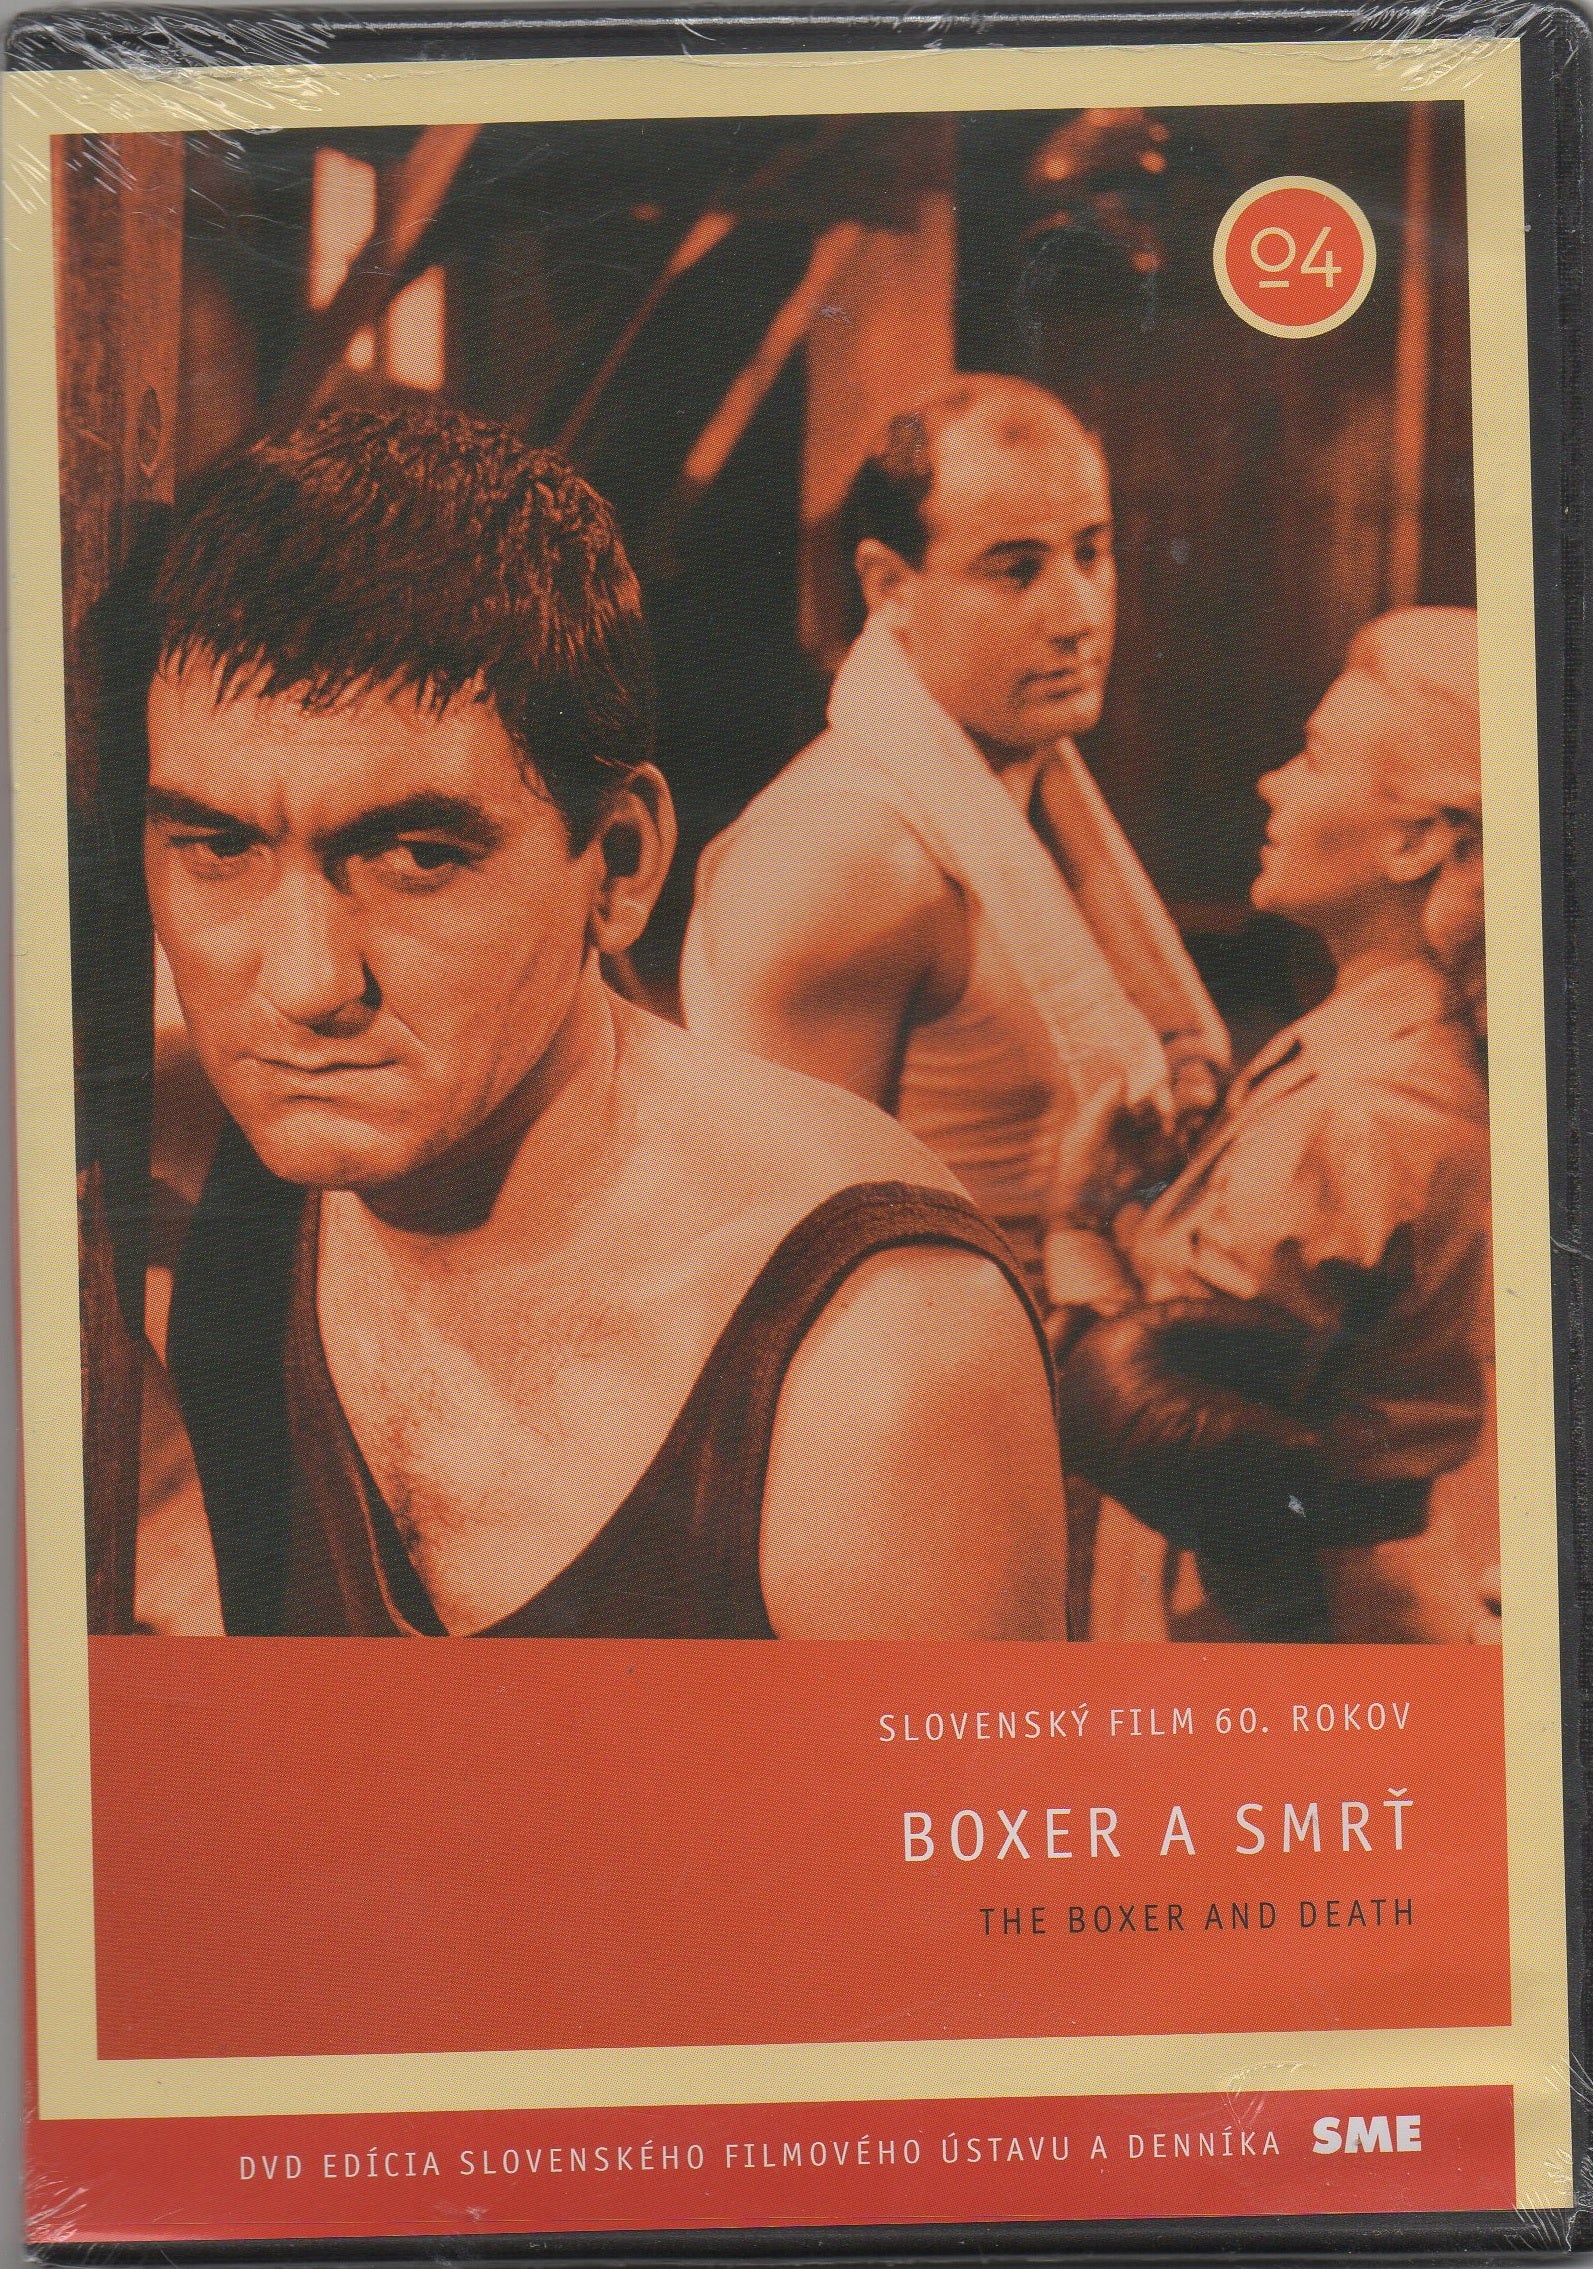 The Boxer And Death / Boxer a smrt DVD